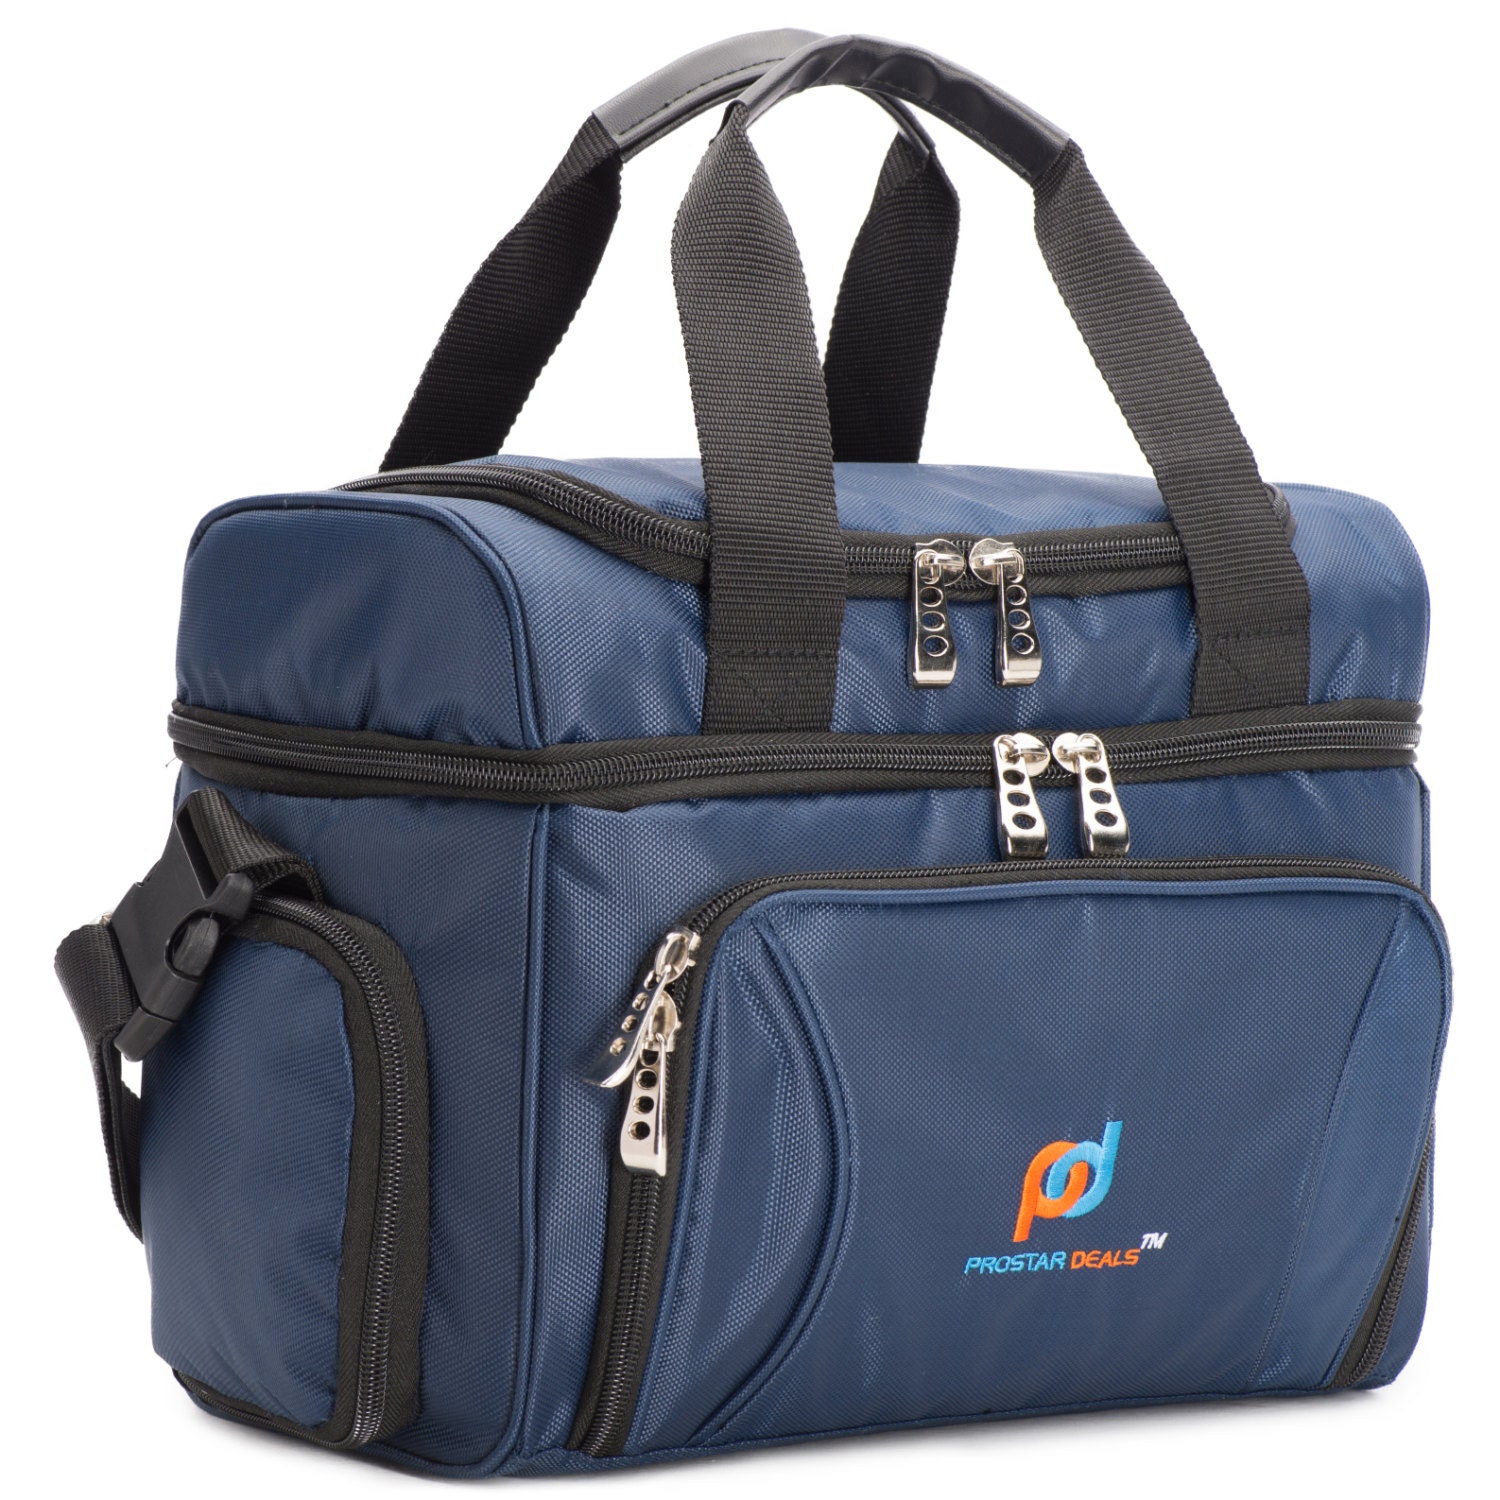 Cooler Bag. Dual Insulated Compartment. Heavy-Duty Polyester